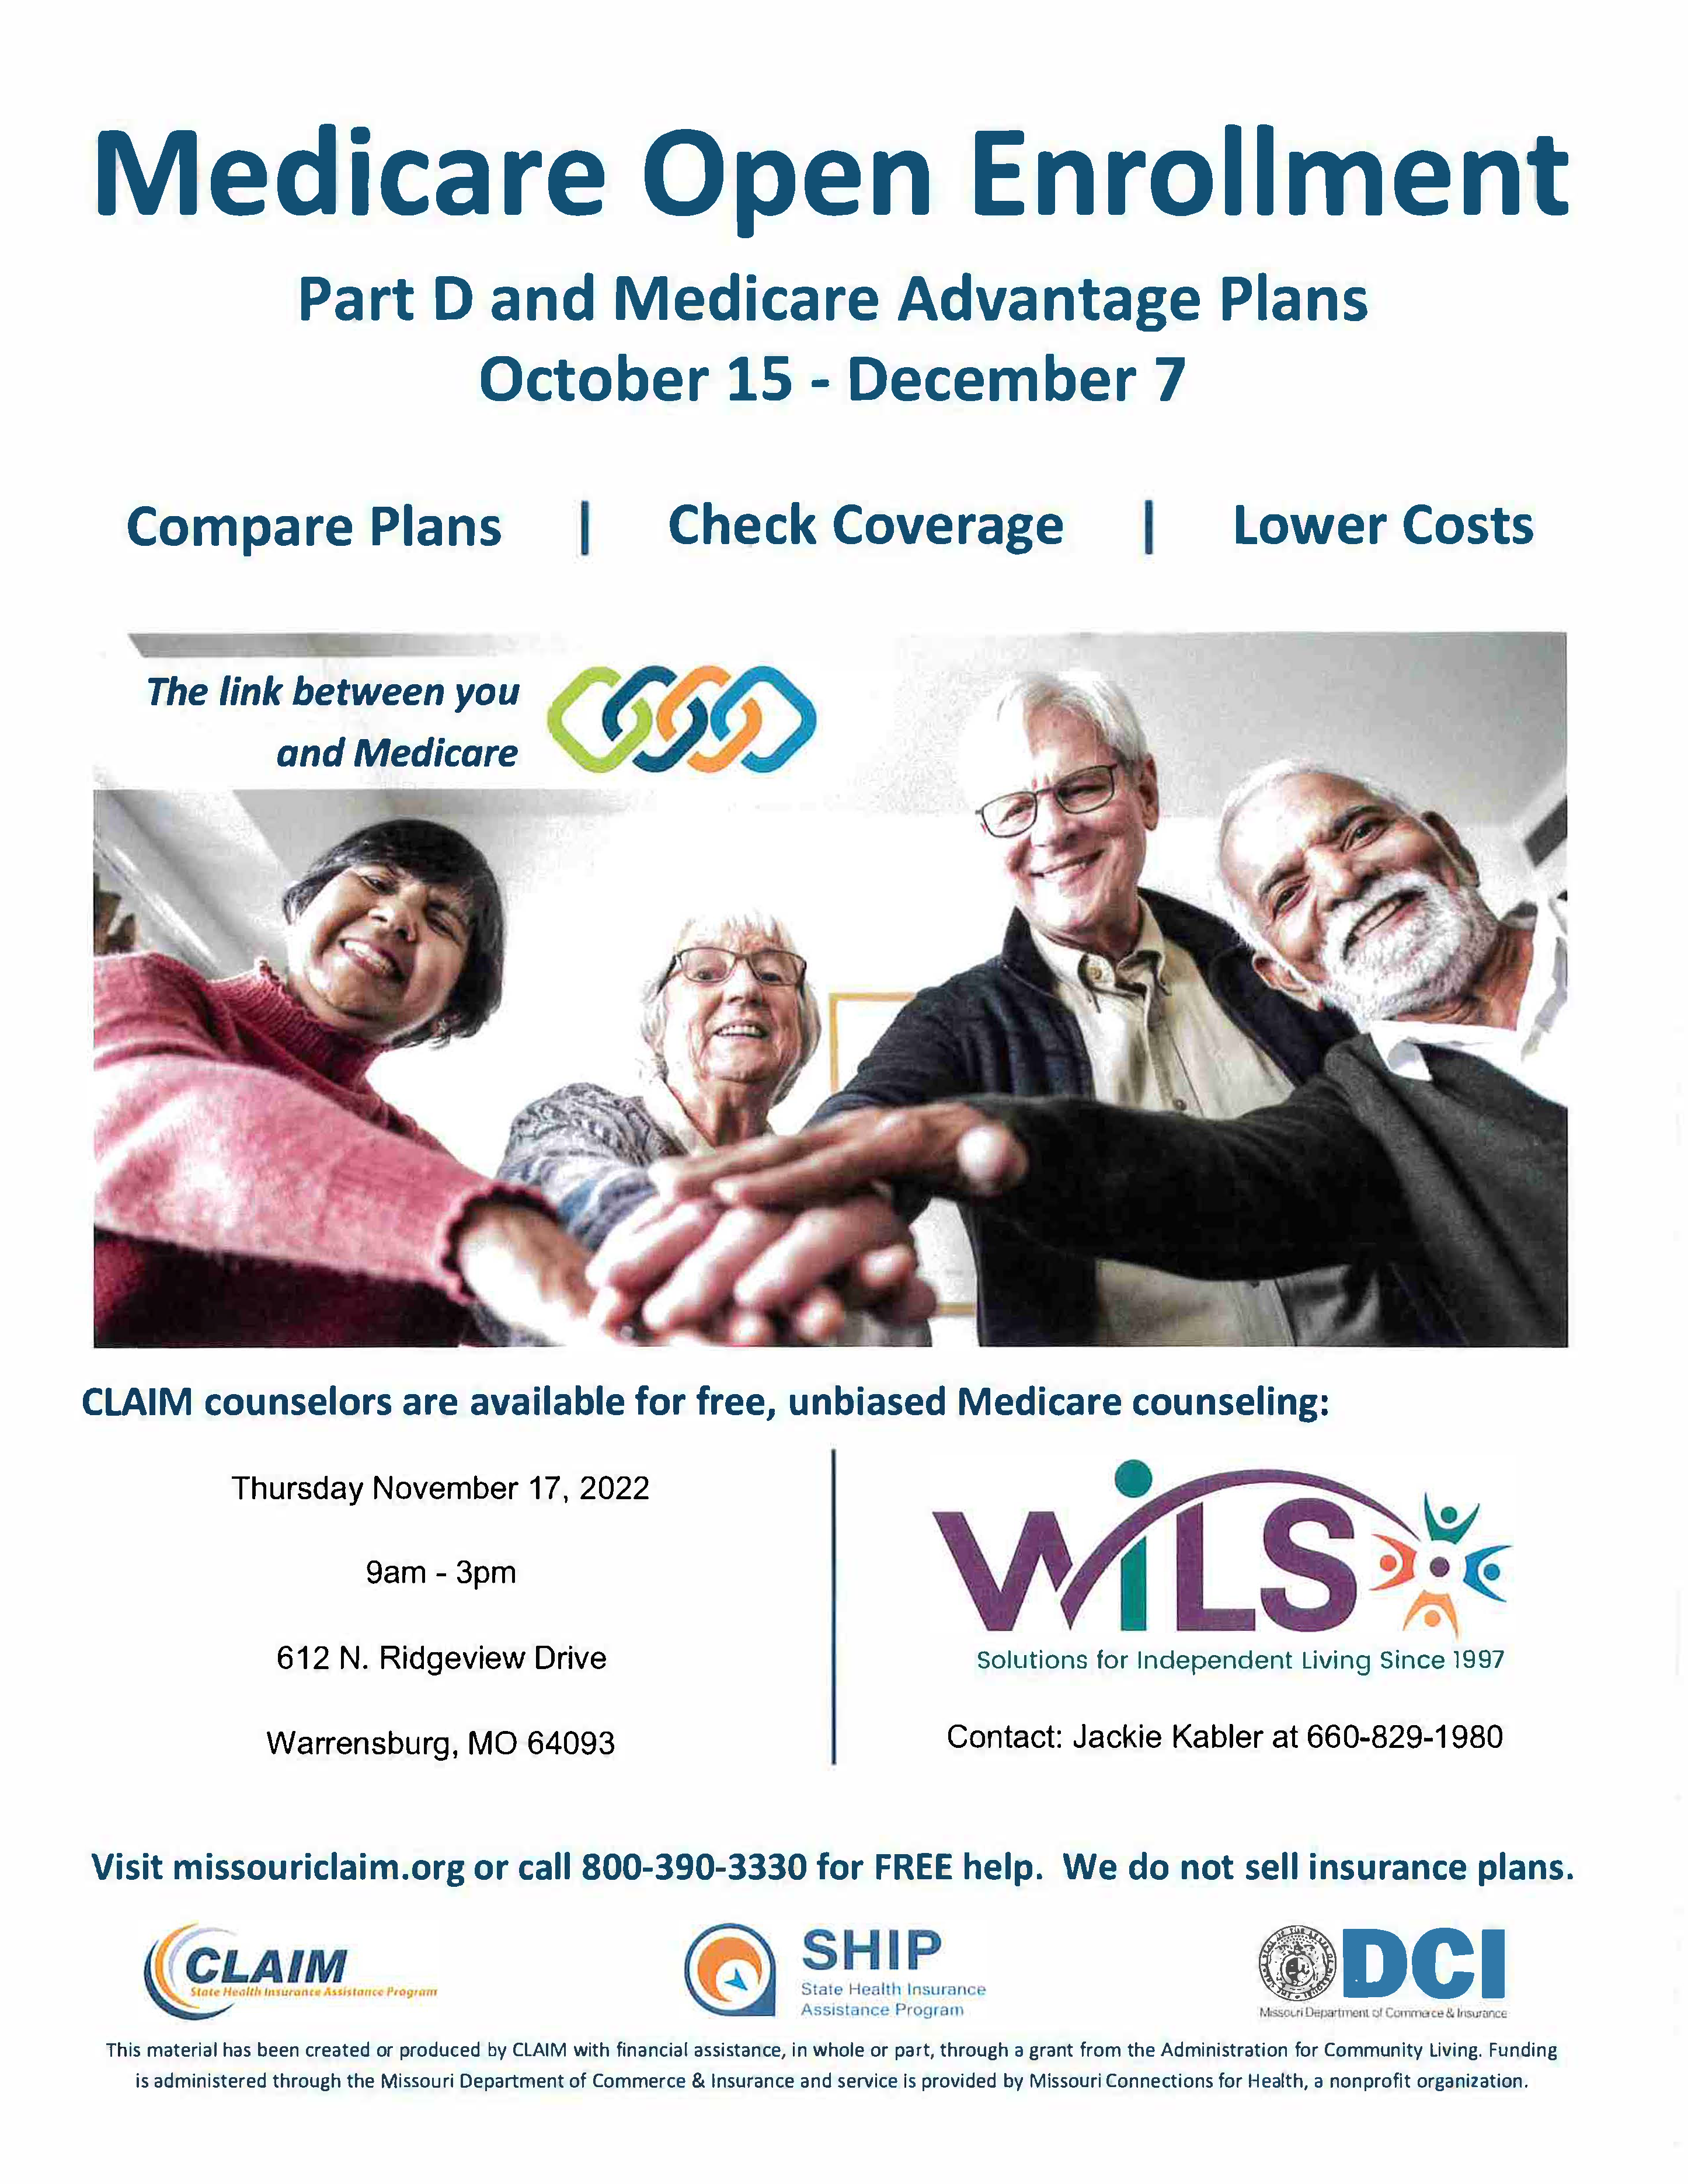 Medicare Q&A with CLAIM @ WILS Warrensburg Office